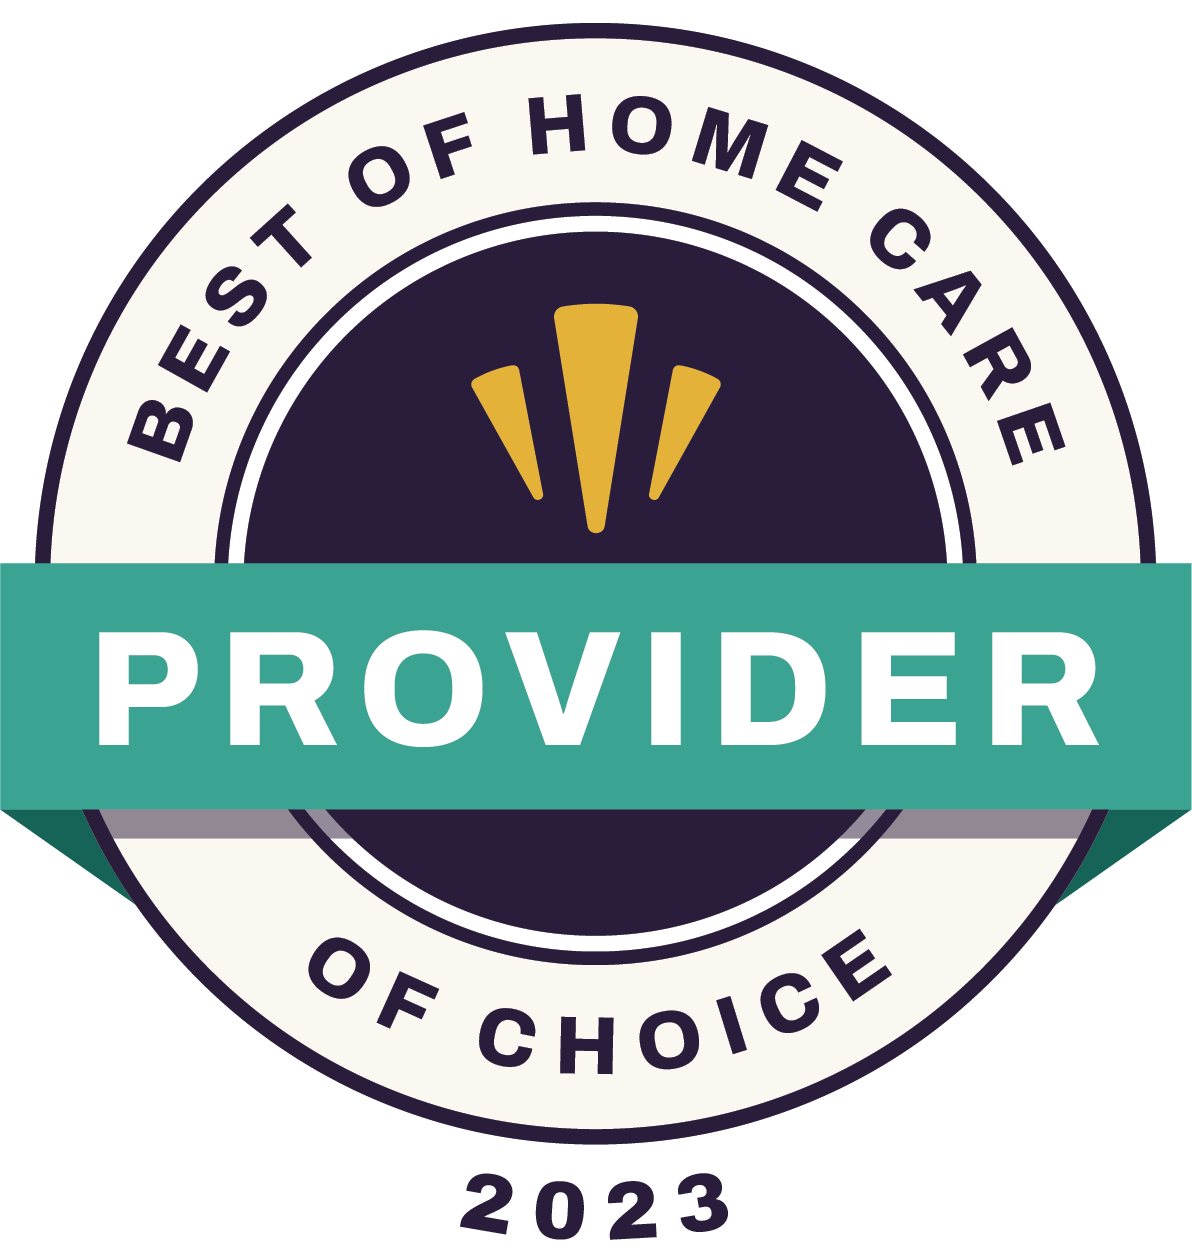 Best of Home Care Provider of Choice 2023